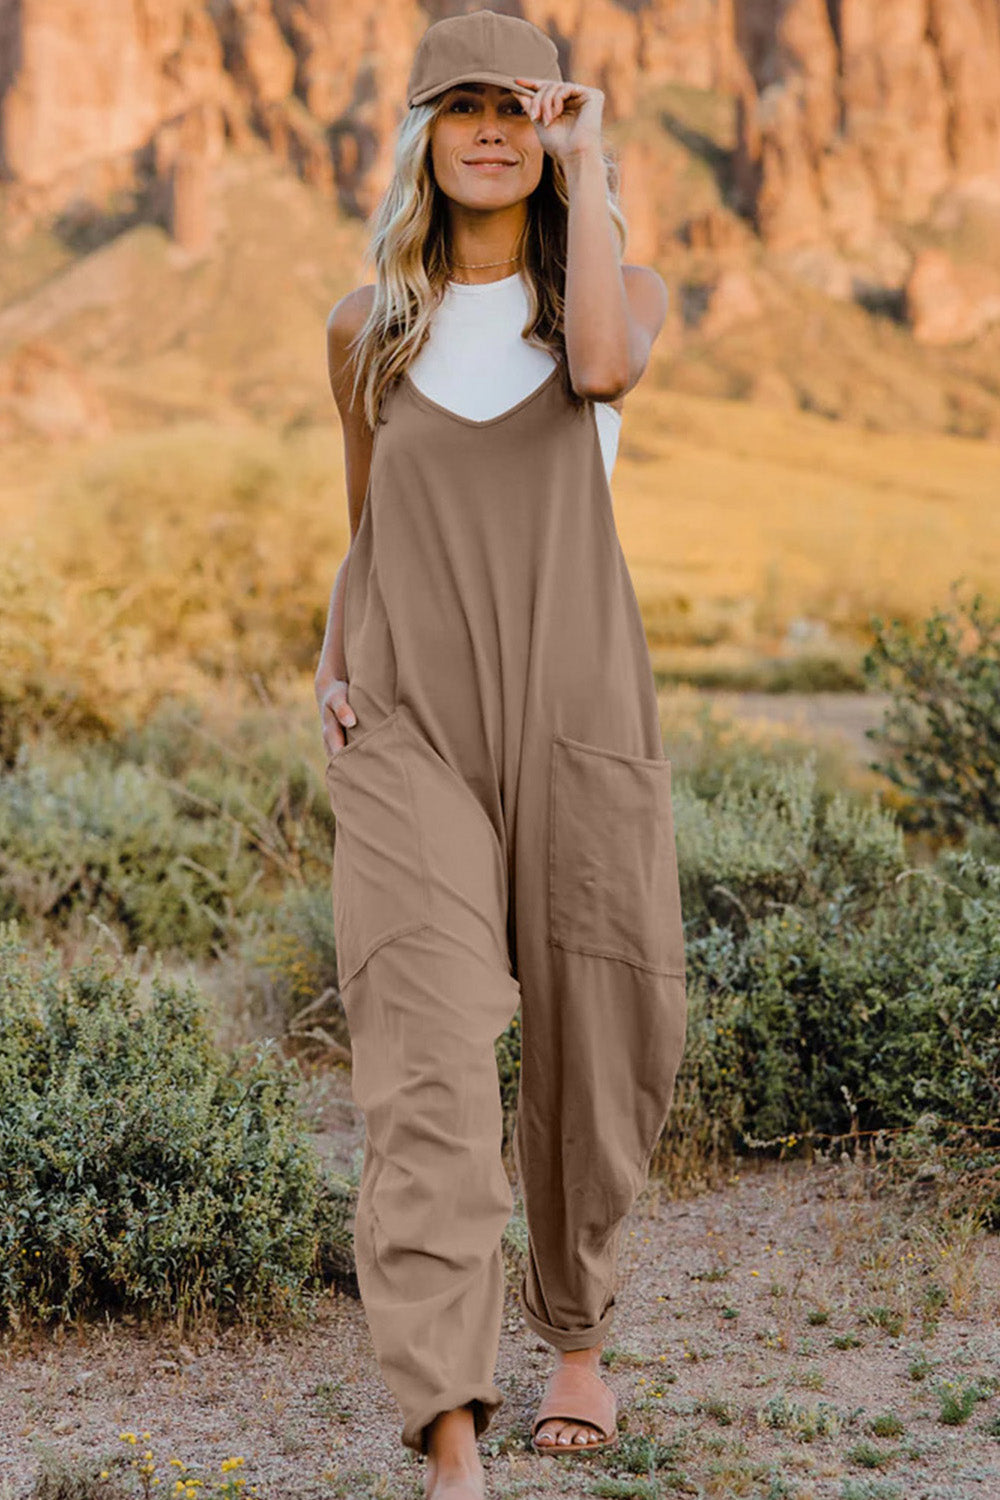 Sunset Vacation  Double Take Plus Size V-Neck Sleeveless Jumpsuit with Pockets  Sunset and Swim Tan S 